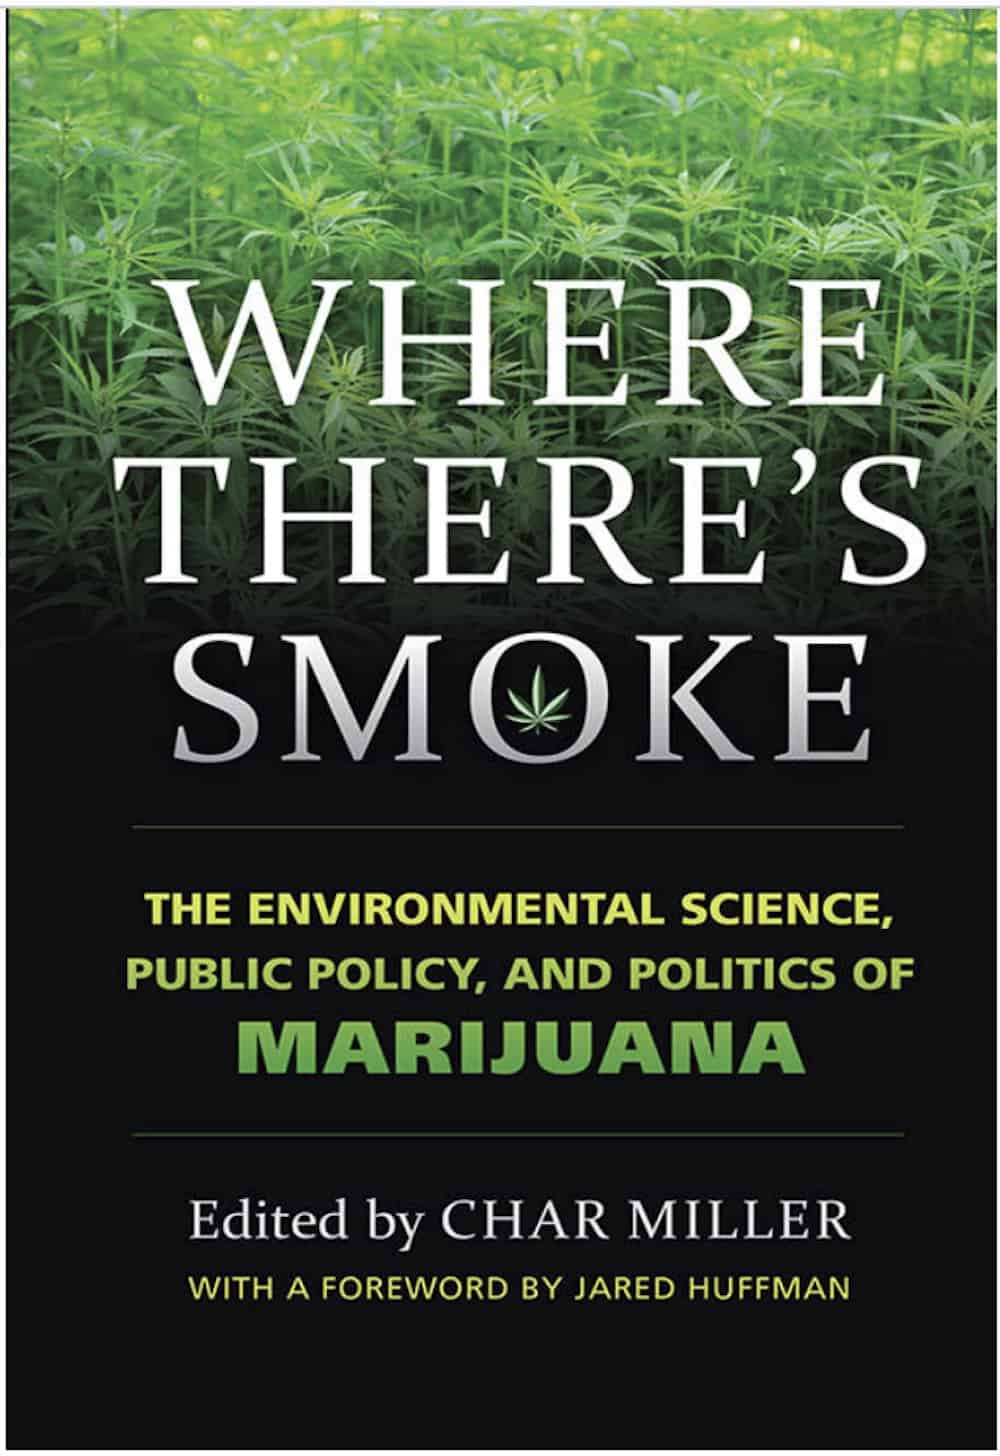 Book Review: "Where There's Smoke" Will Light a Fire in You